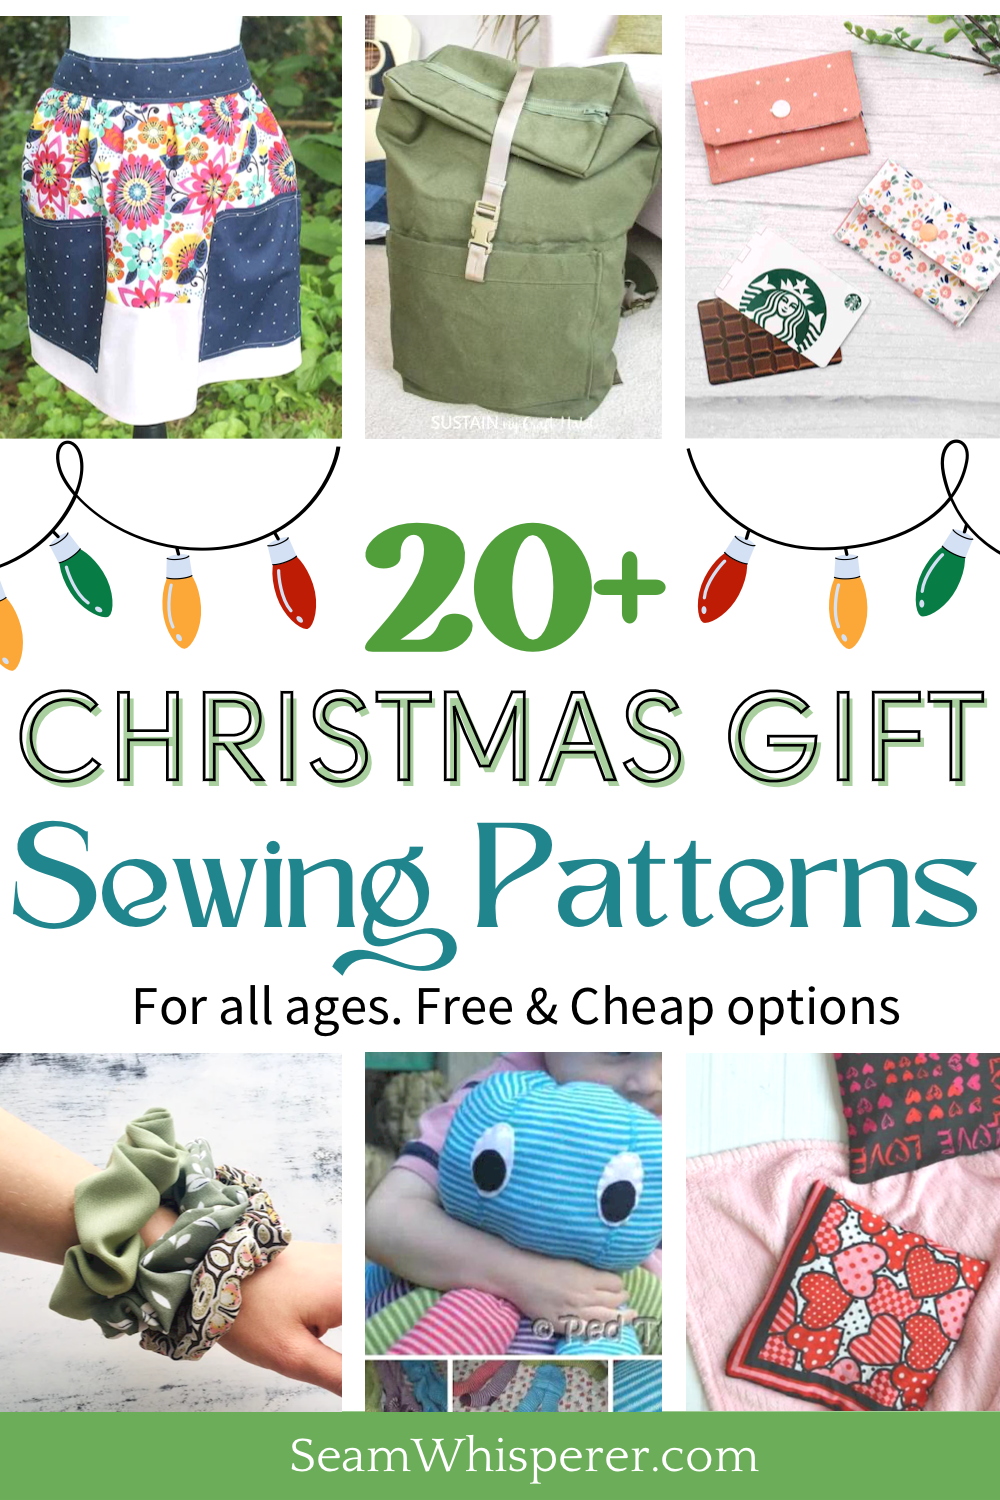 Our 20 most popular FREE kids sewing patterns - Sew Modern Kids